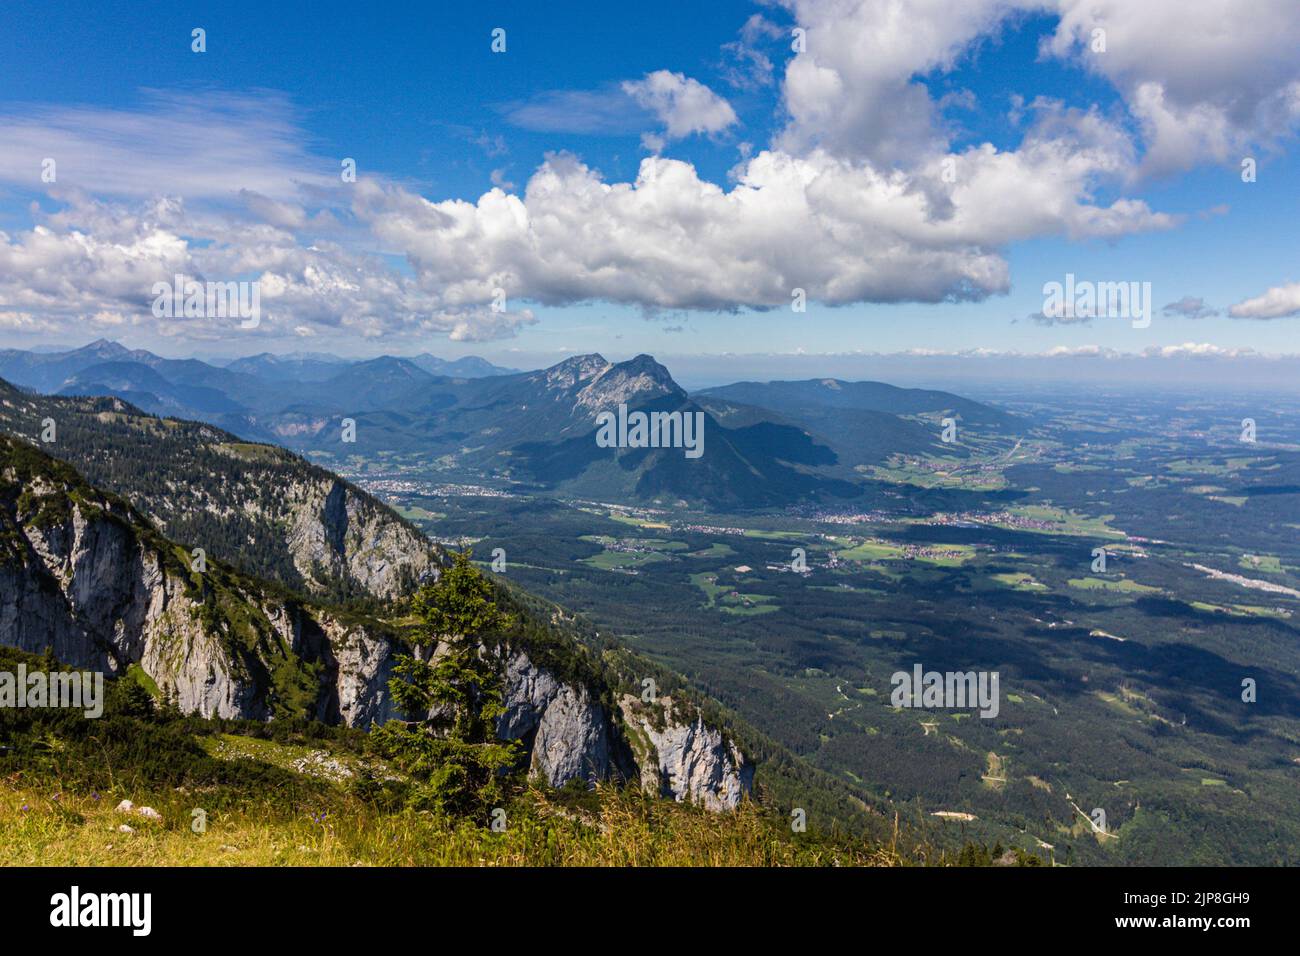 Untersberg is the northernmost massif of the Berchtesgaden Alps, a prominent spur straddling the border between Berchtesgaden, Germany and Salzburg, Stock Photo